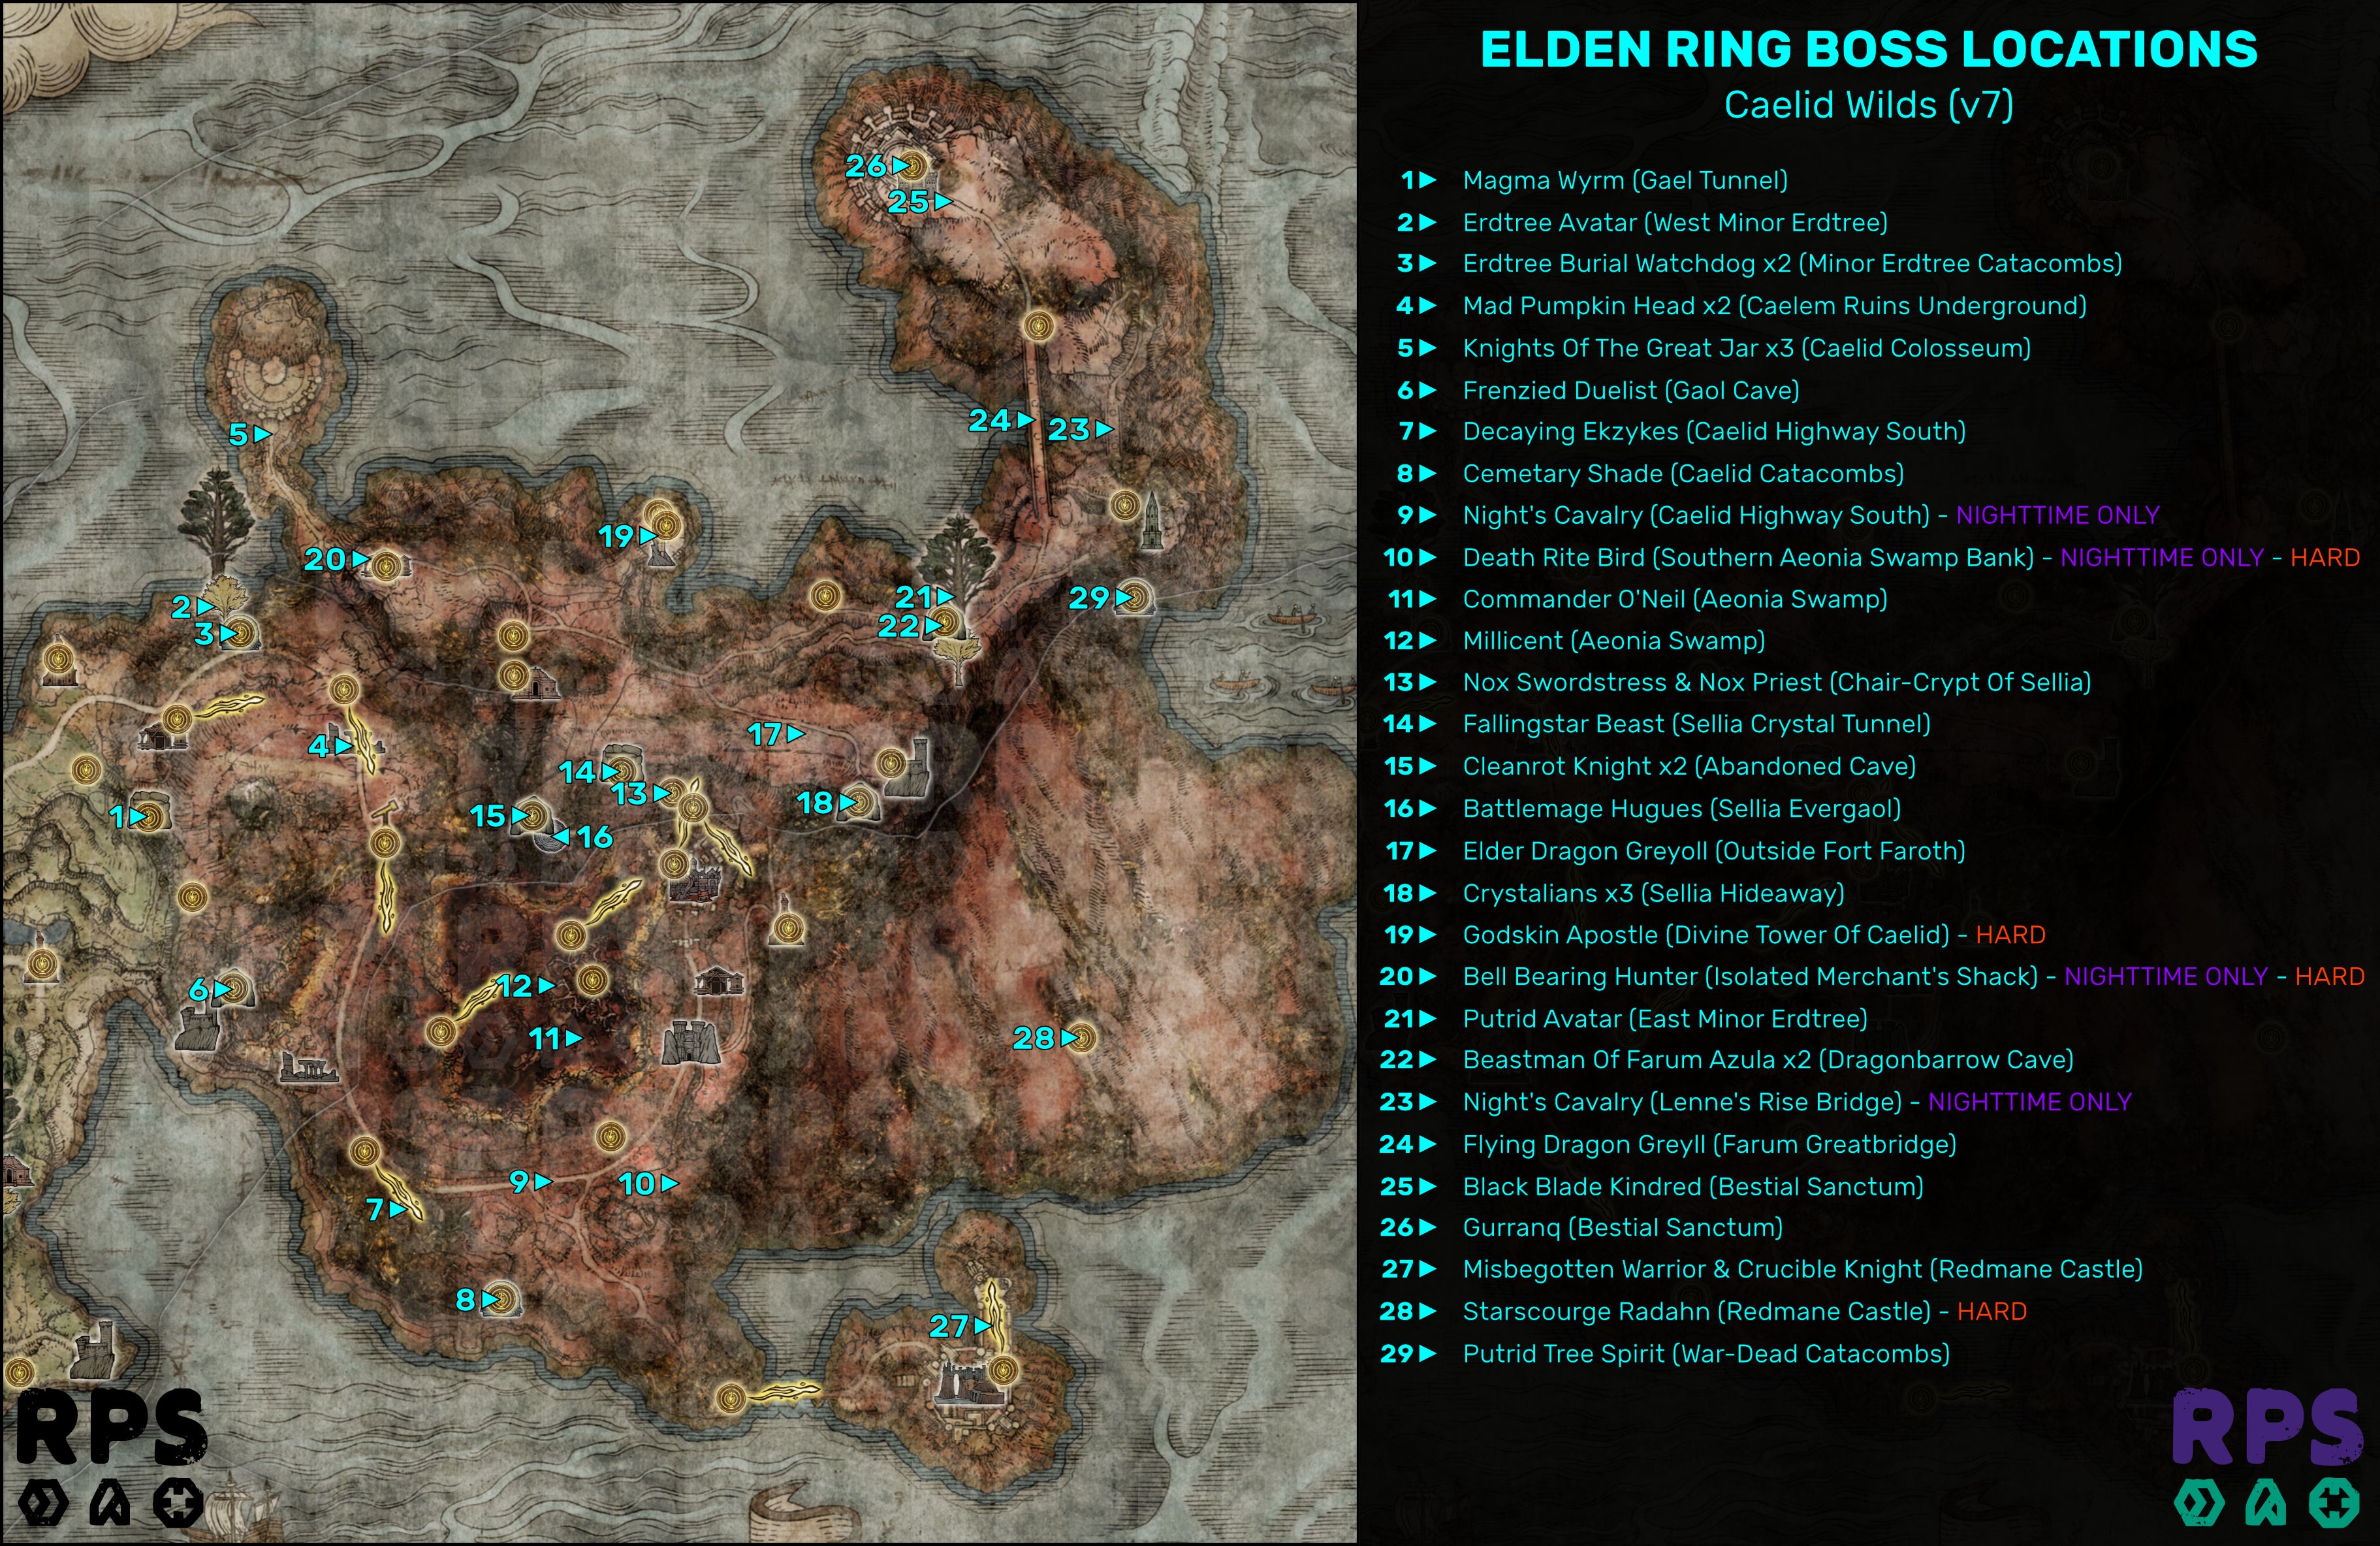 A map of Caelid in Elden Ring, with the locations of every single boss encounter marked and numbered.